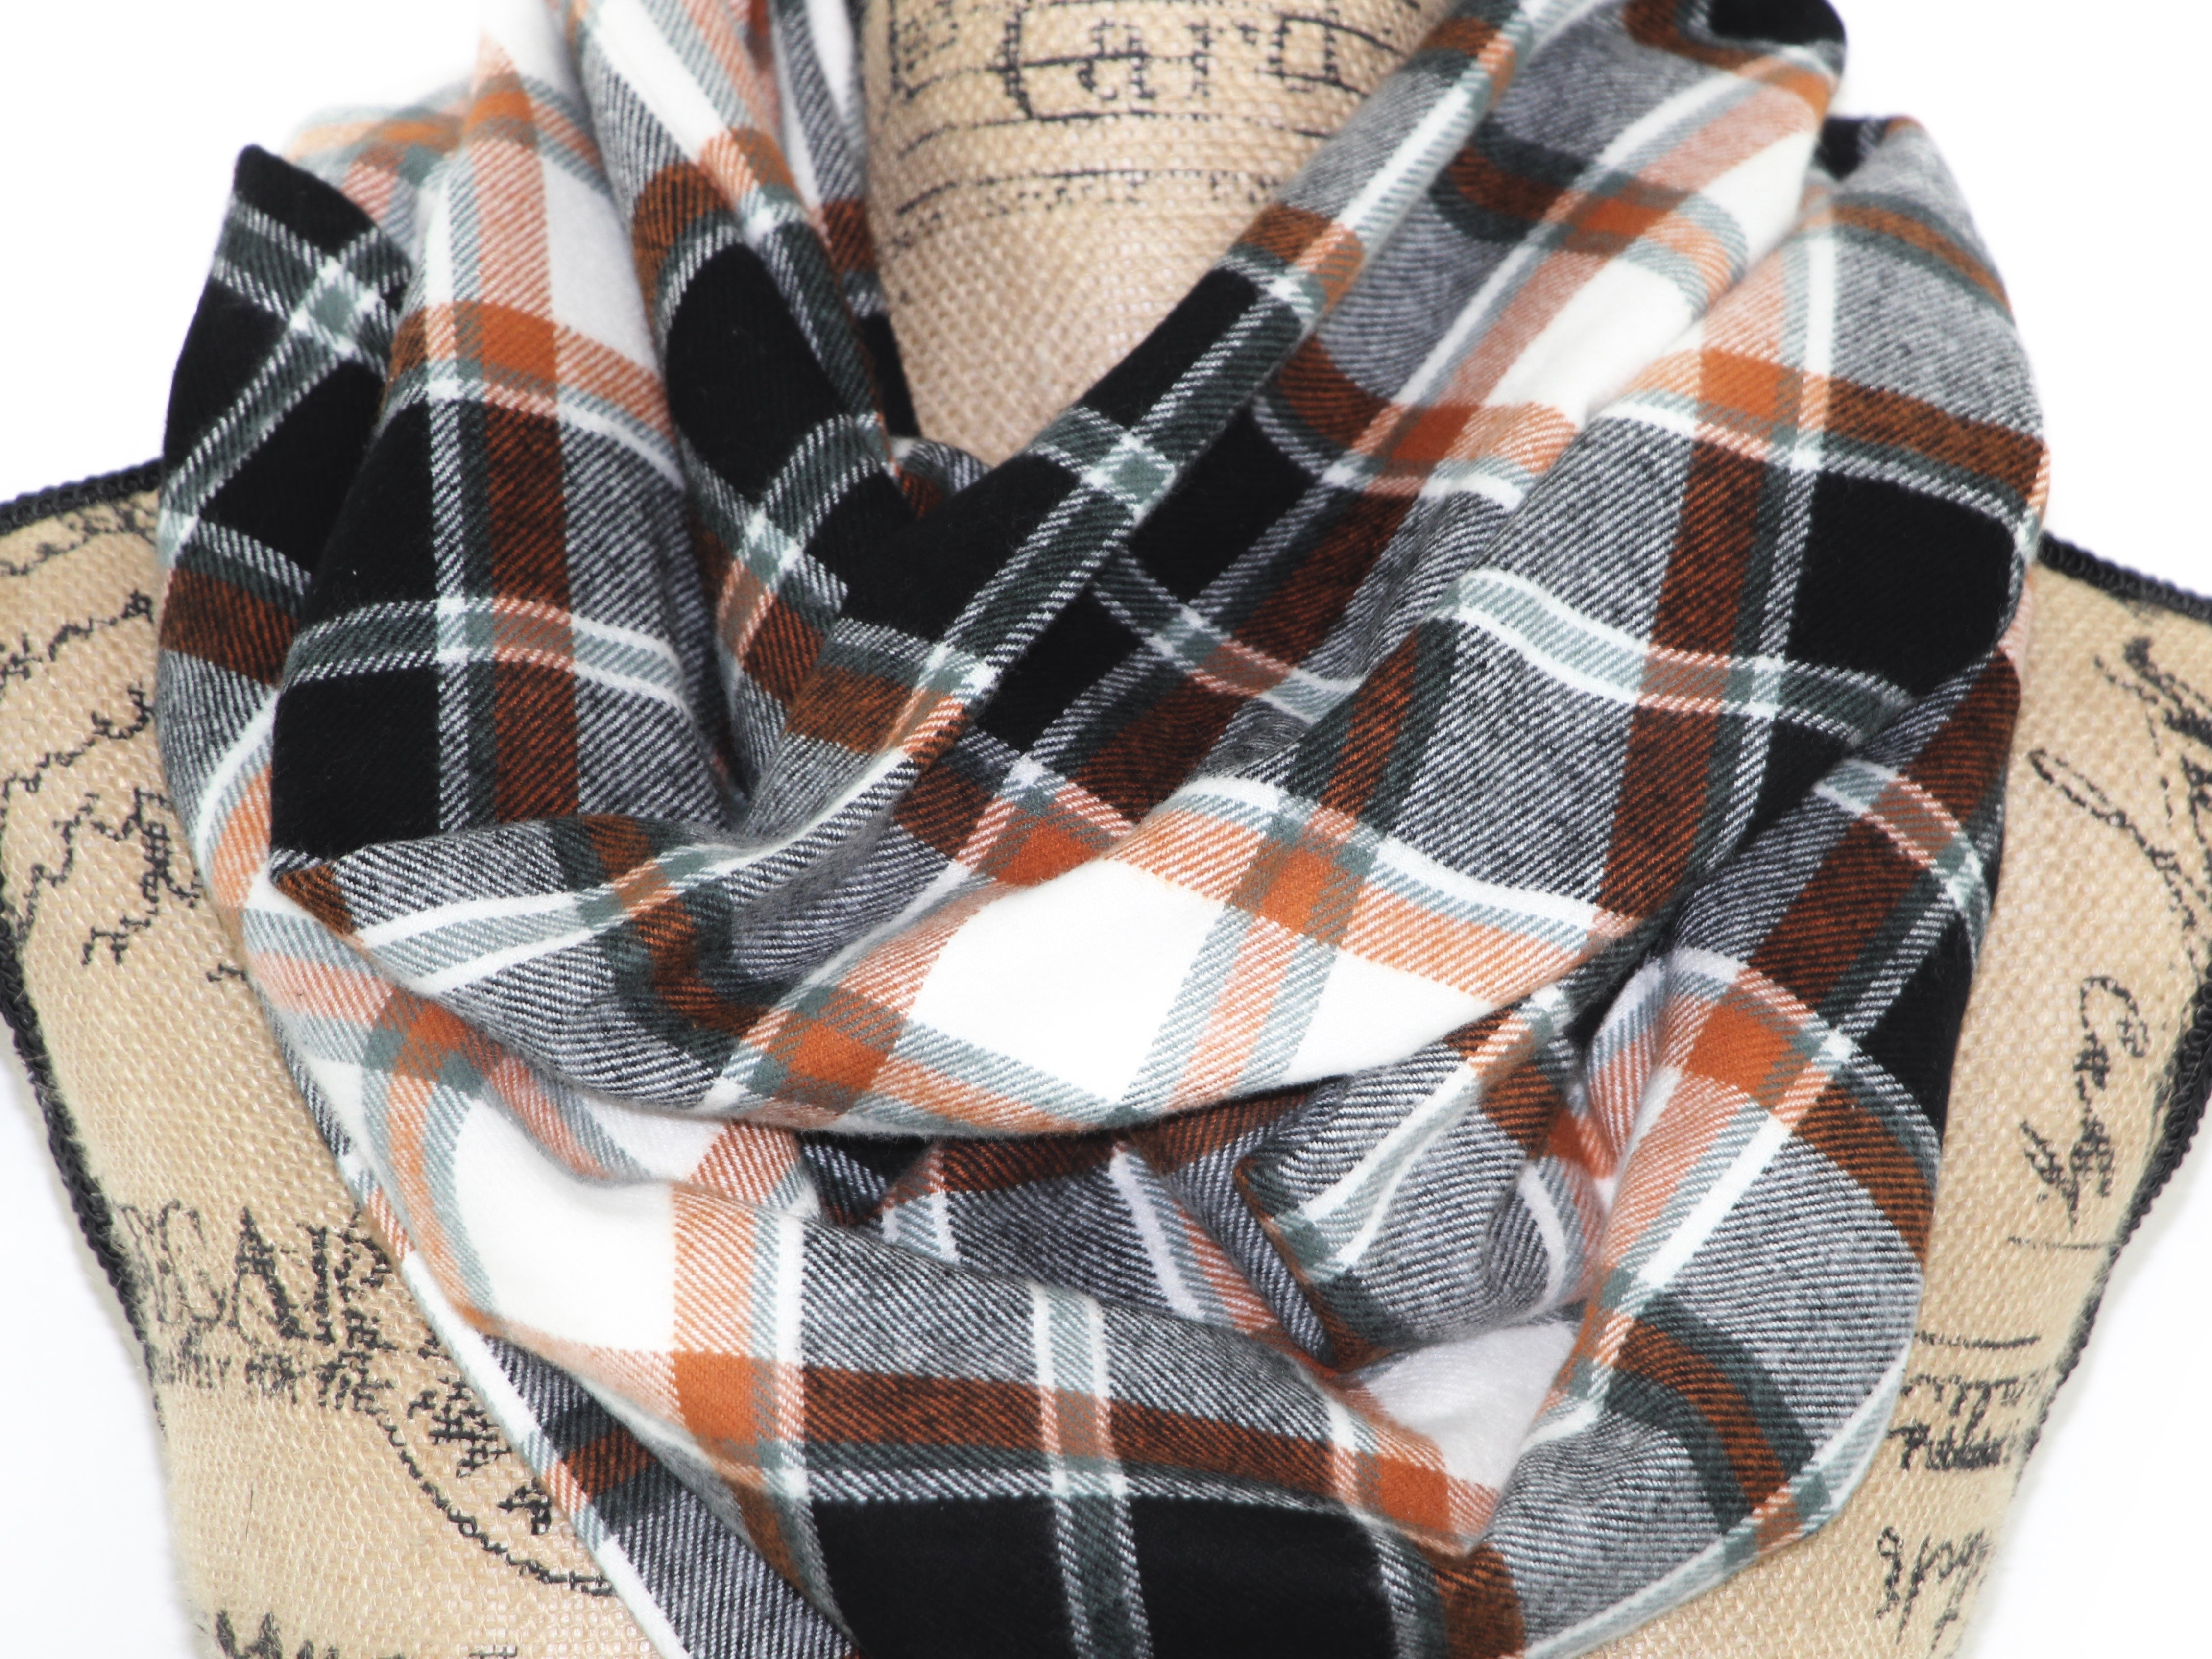 Black, White, Teal-Gray, and Orange Medium Weight Flannel Plaid Infinity or Blanket Scarf